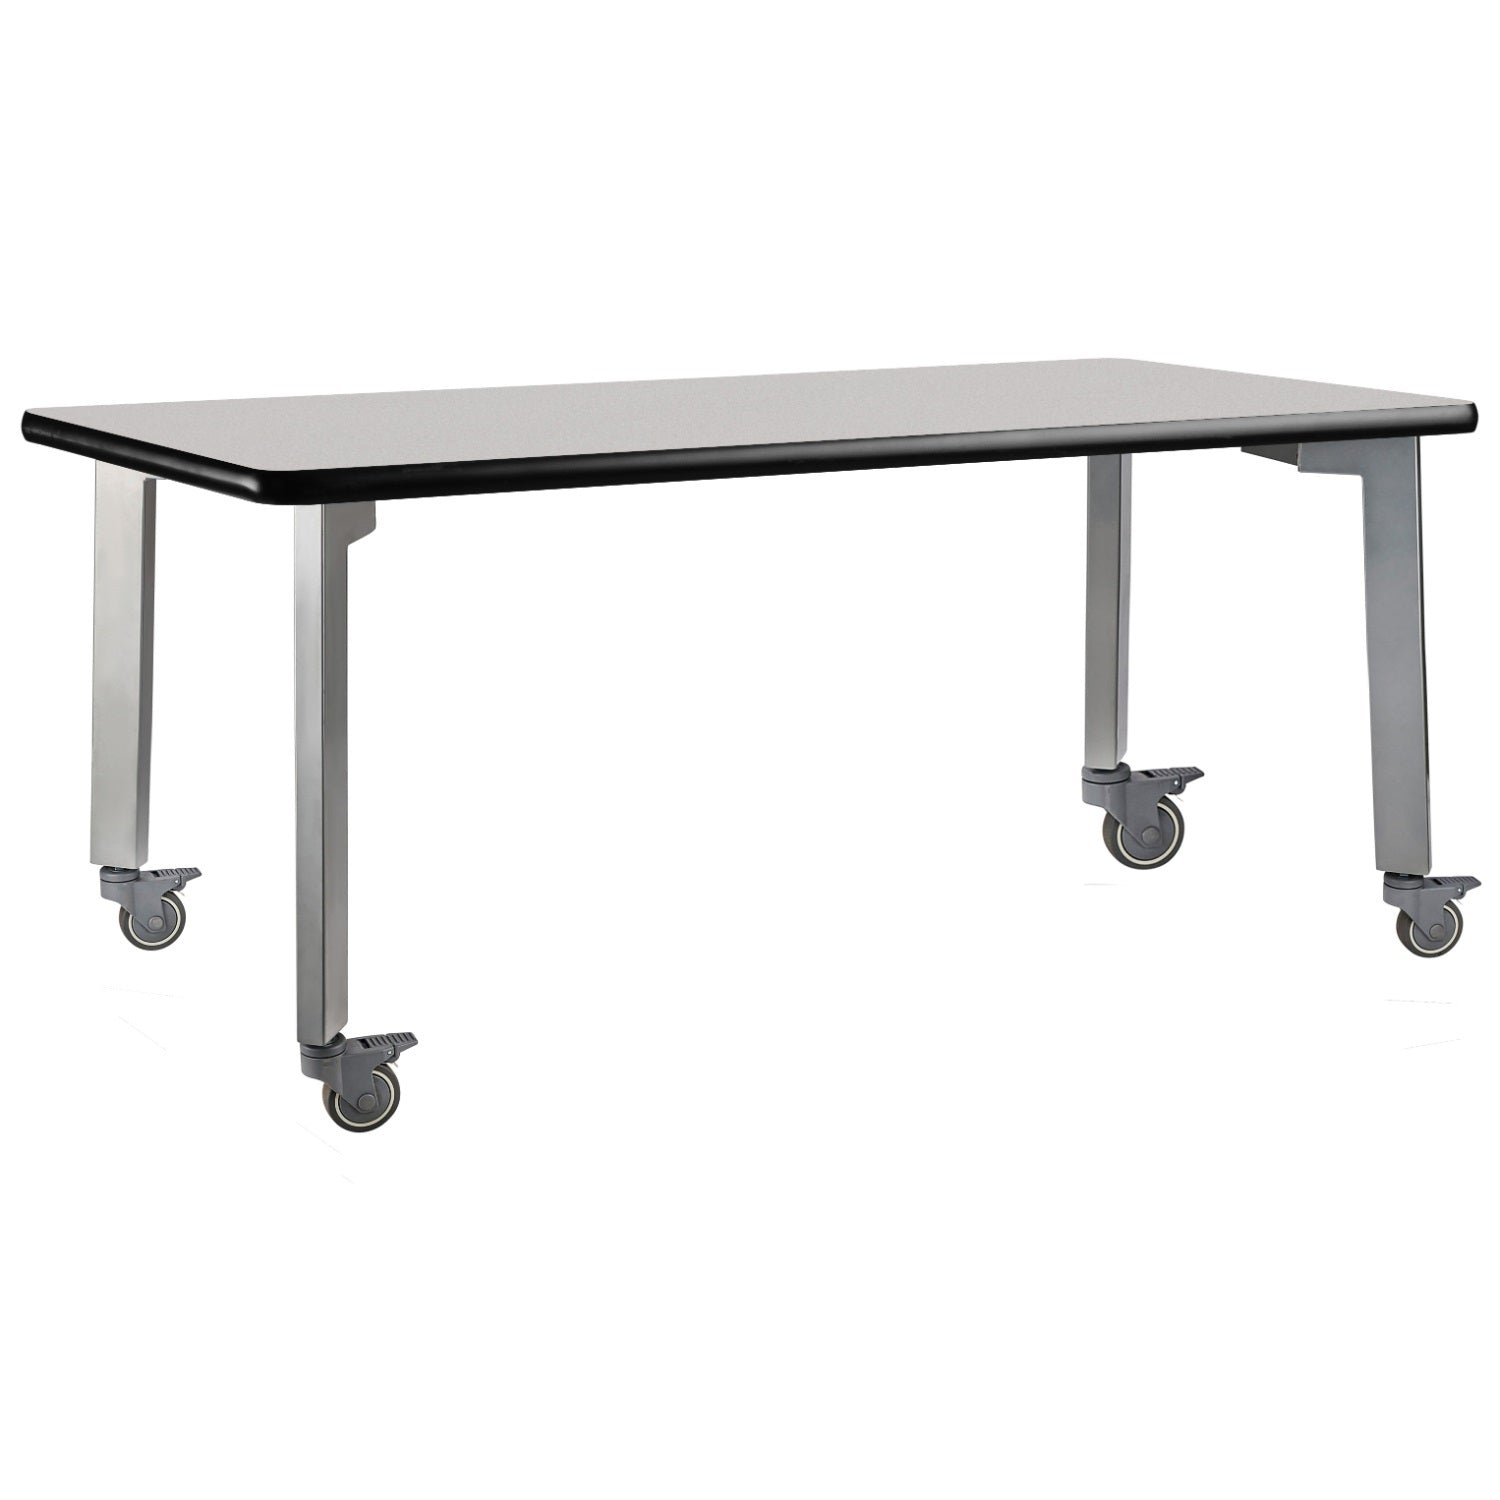 Titan Mobile Table, 36" x 84", Supreme High Pressure Laminate Top with MDF Core and ProtectEdge